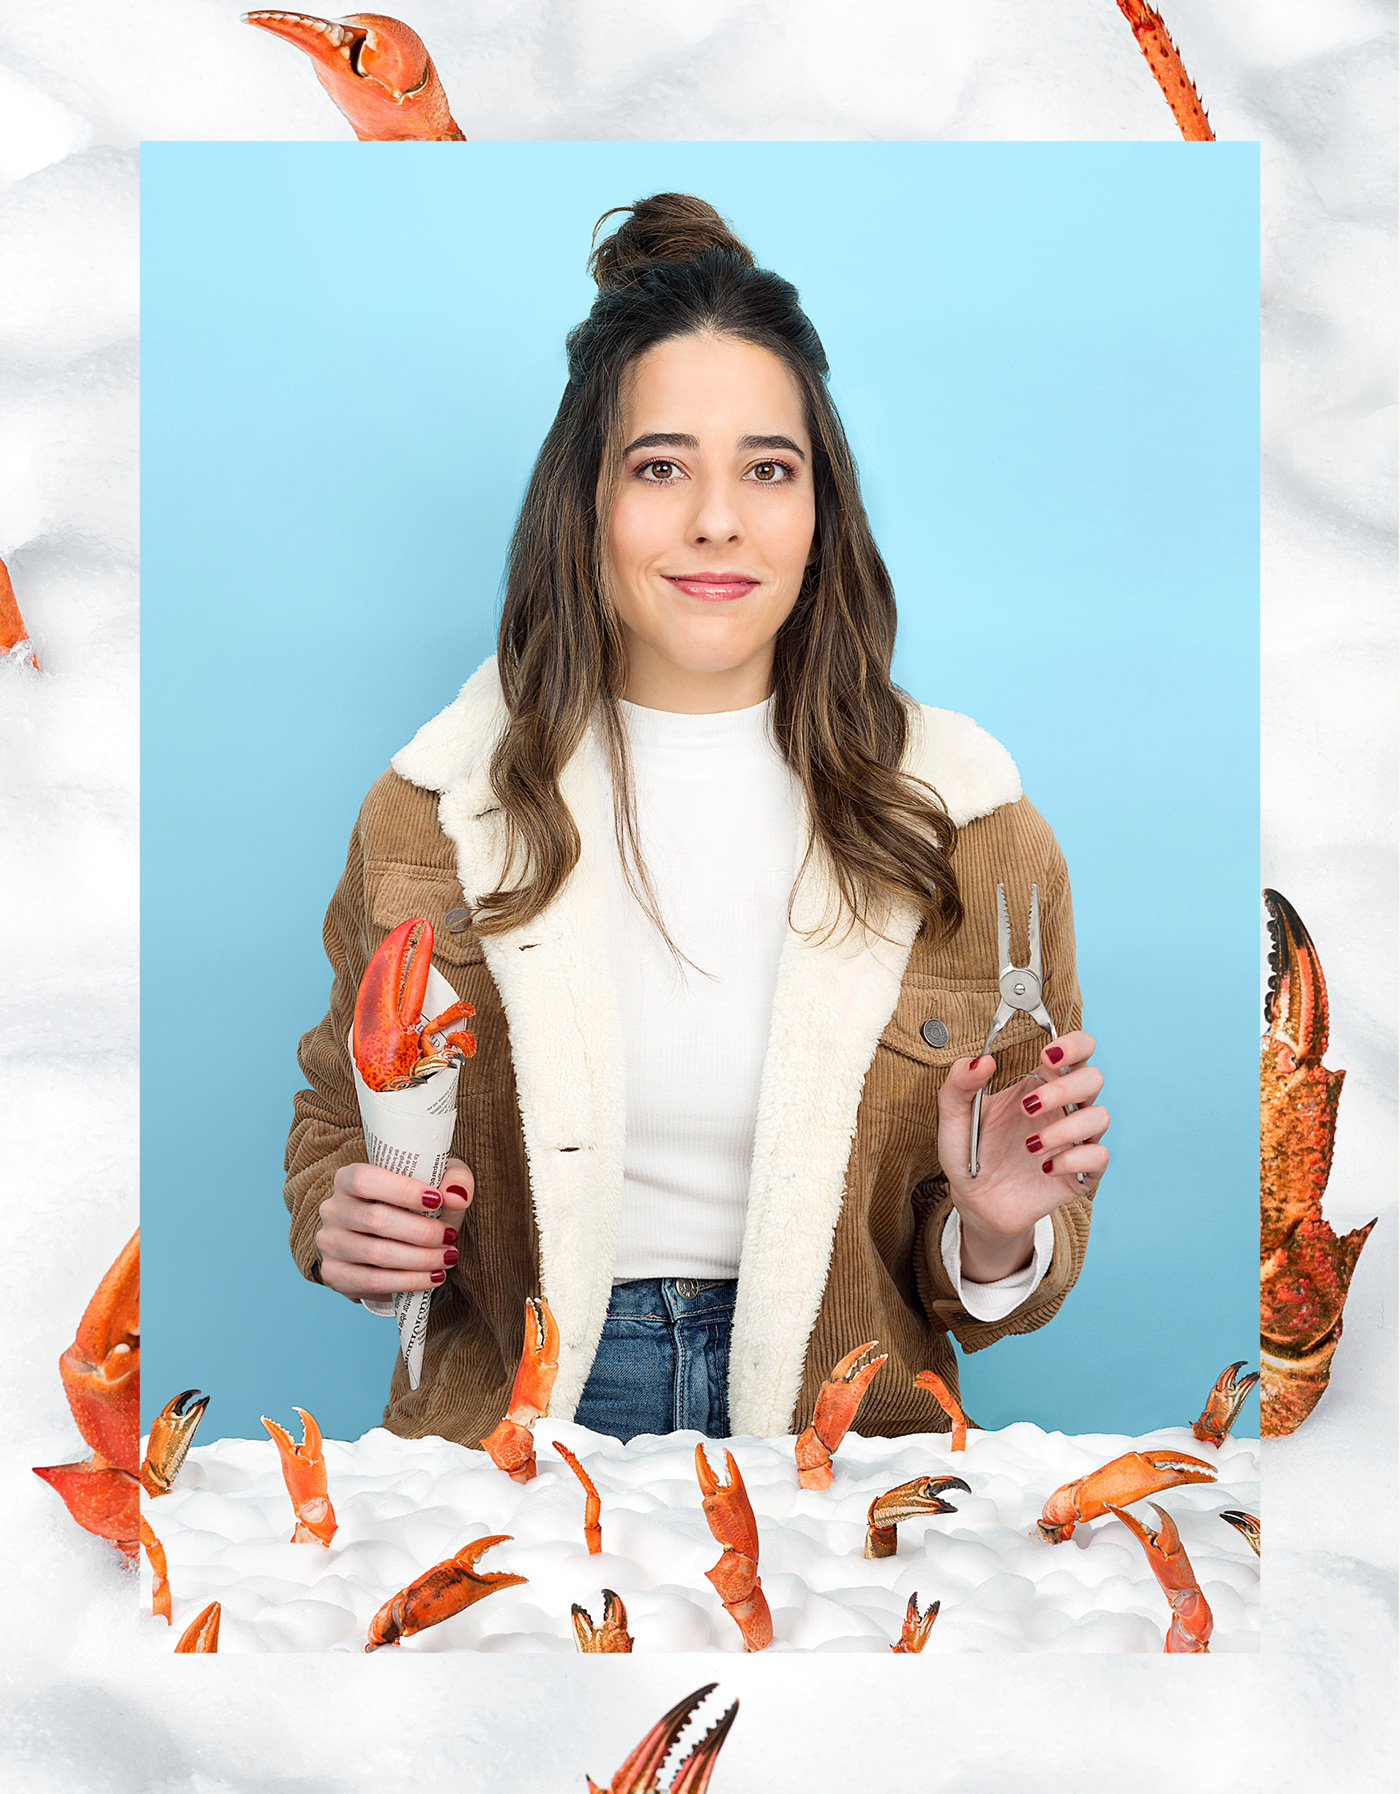 Creative and colourful portrait based on still life creative direction, lobster and snow